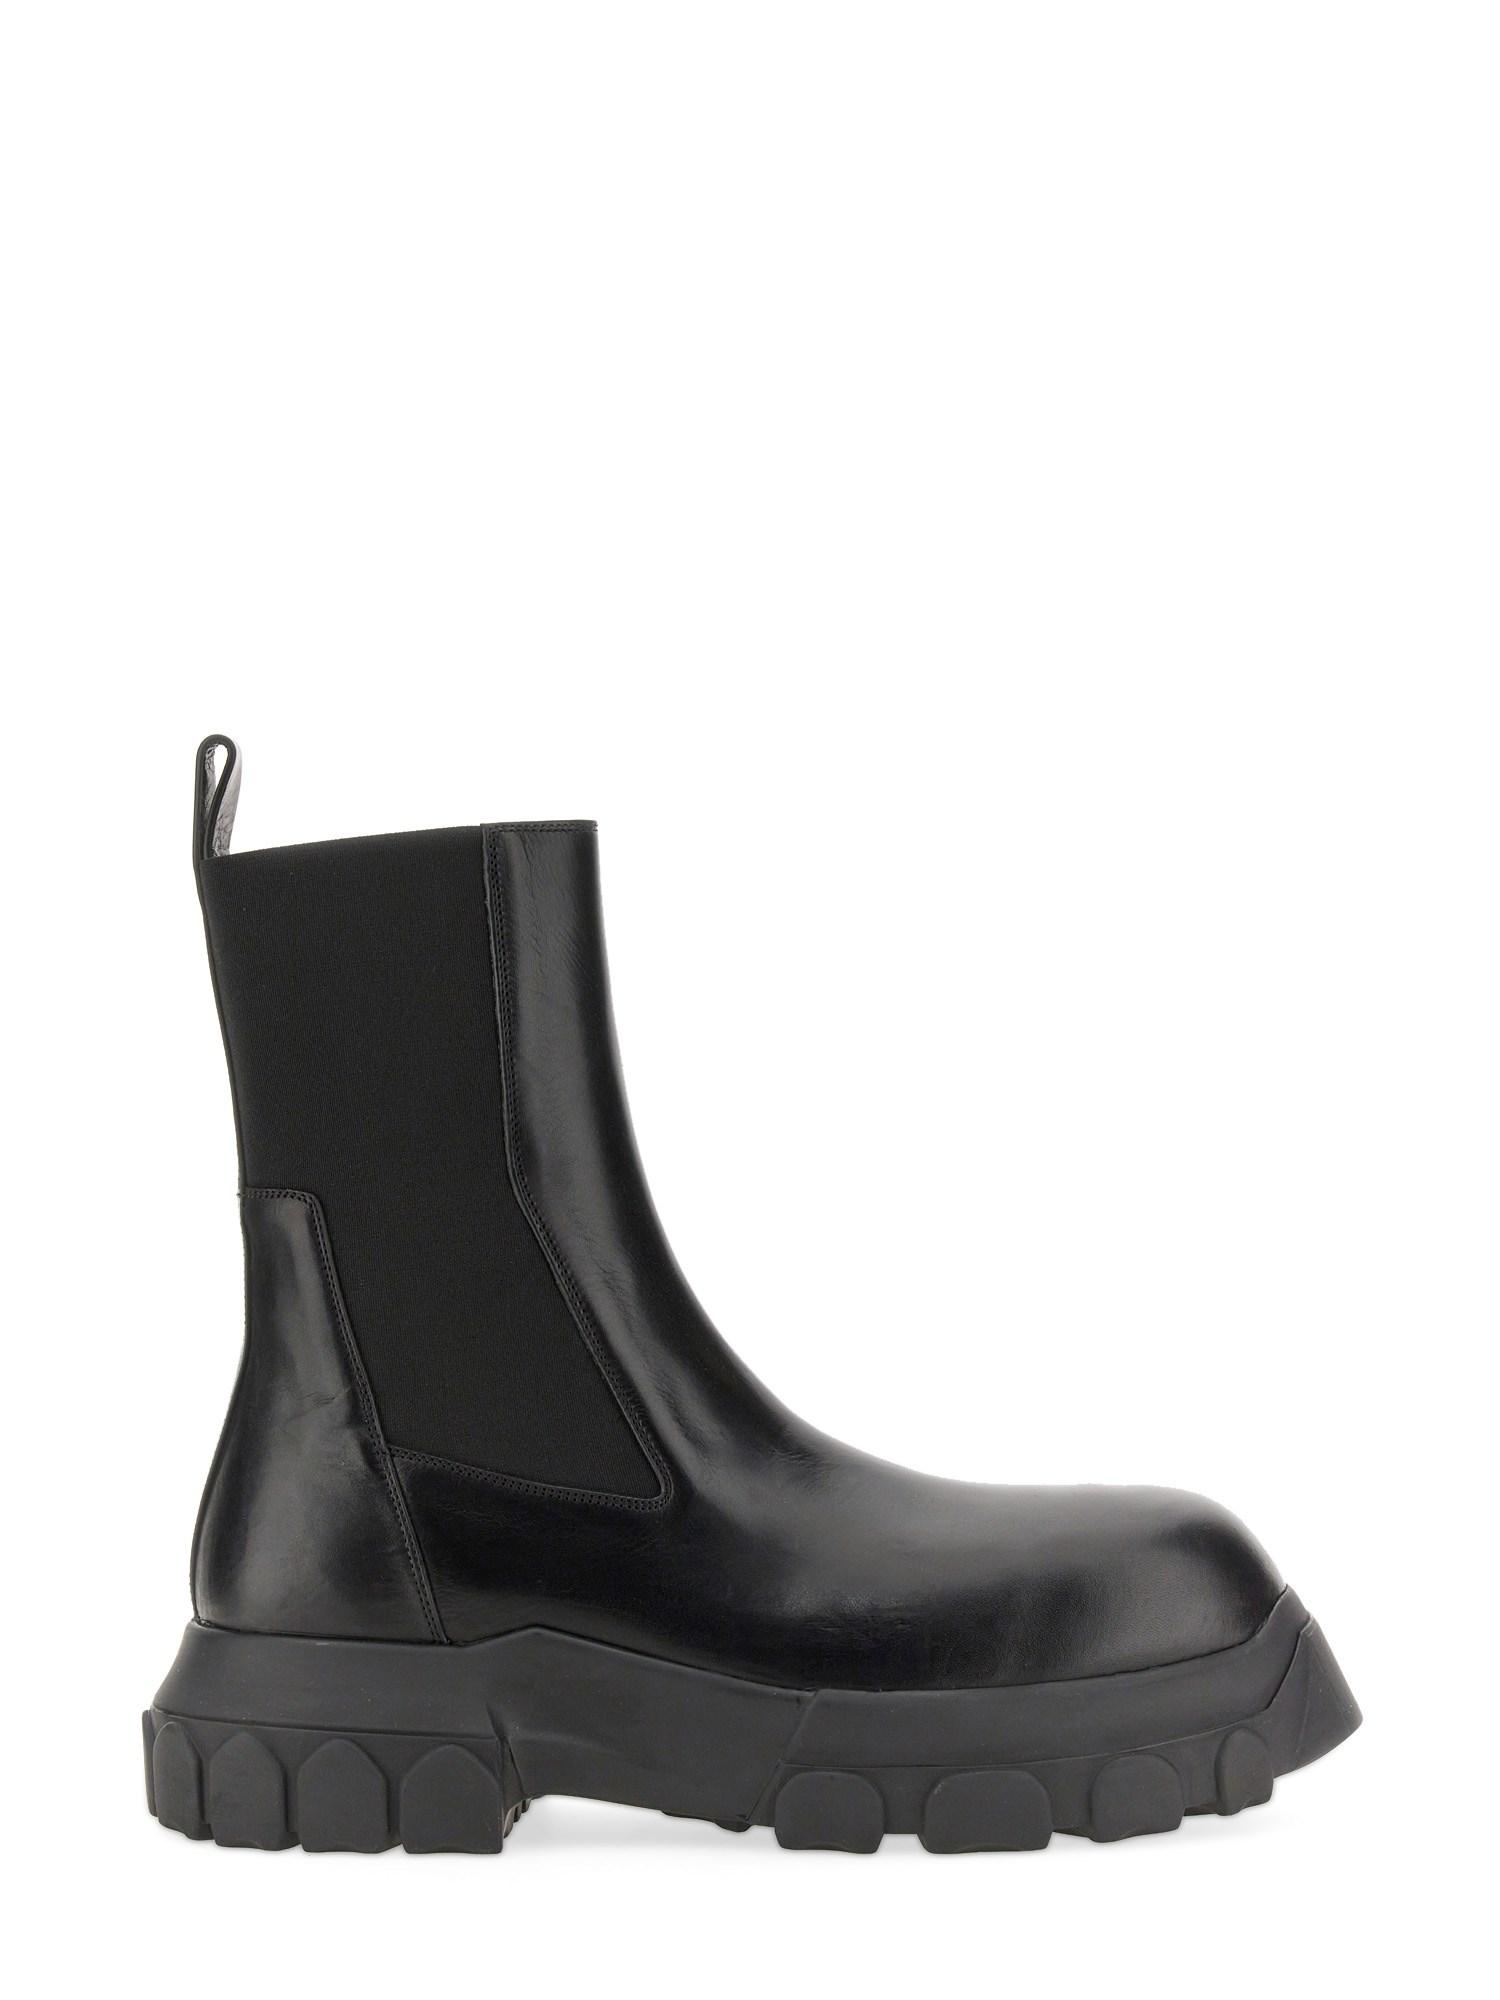 Rick Owens Bozo Tractor Beatle Boots in Black for Men | Lyst